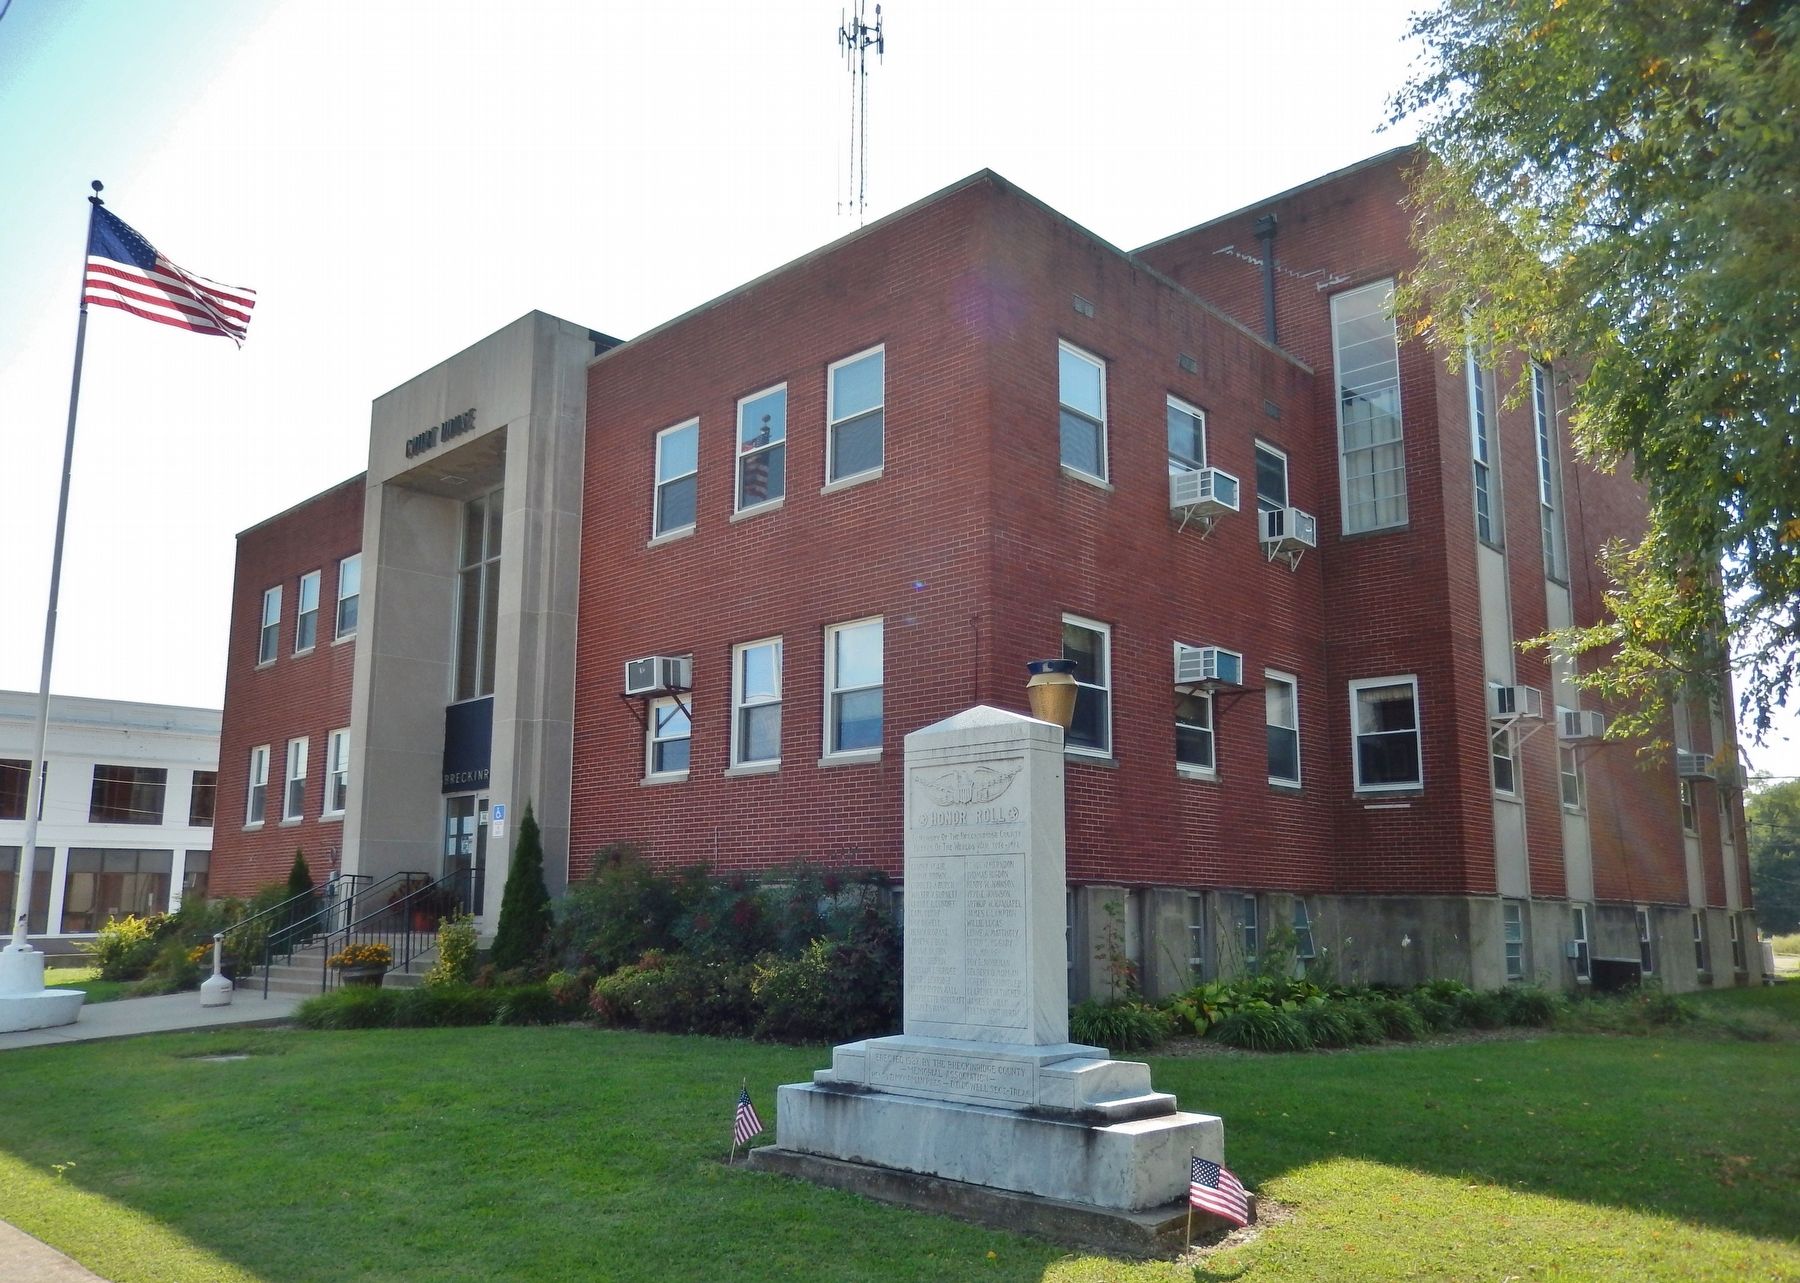 Breckinridge County Courthouse (<i>corner view from intersection near marker</i>) image. Click for full size.